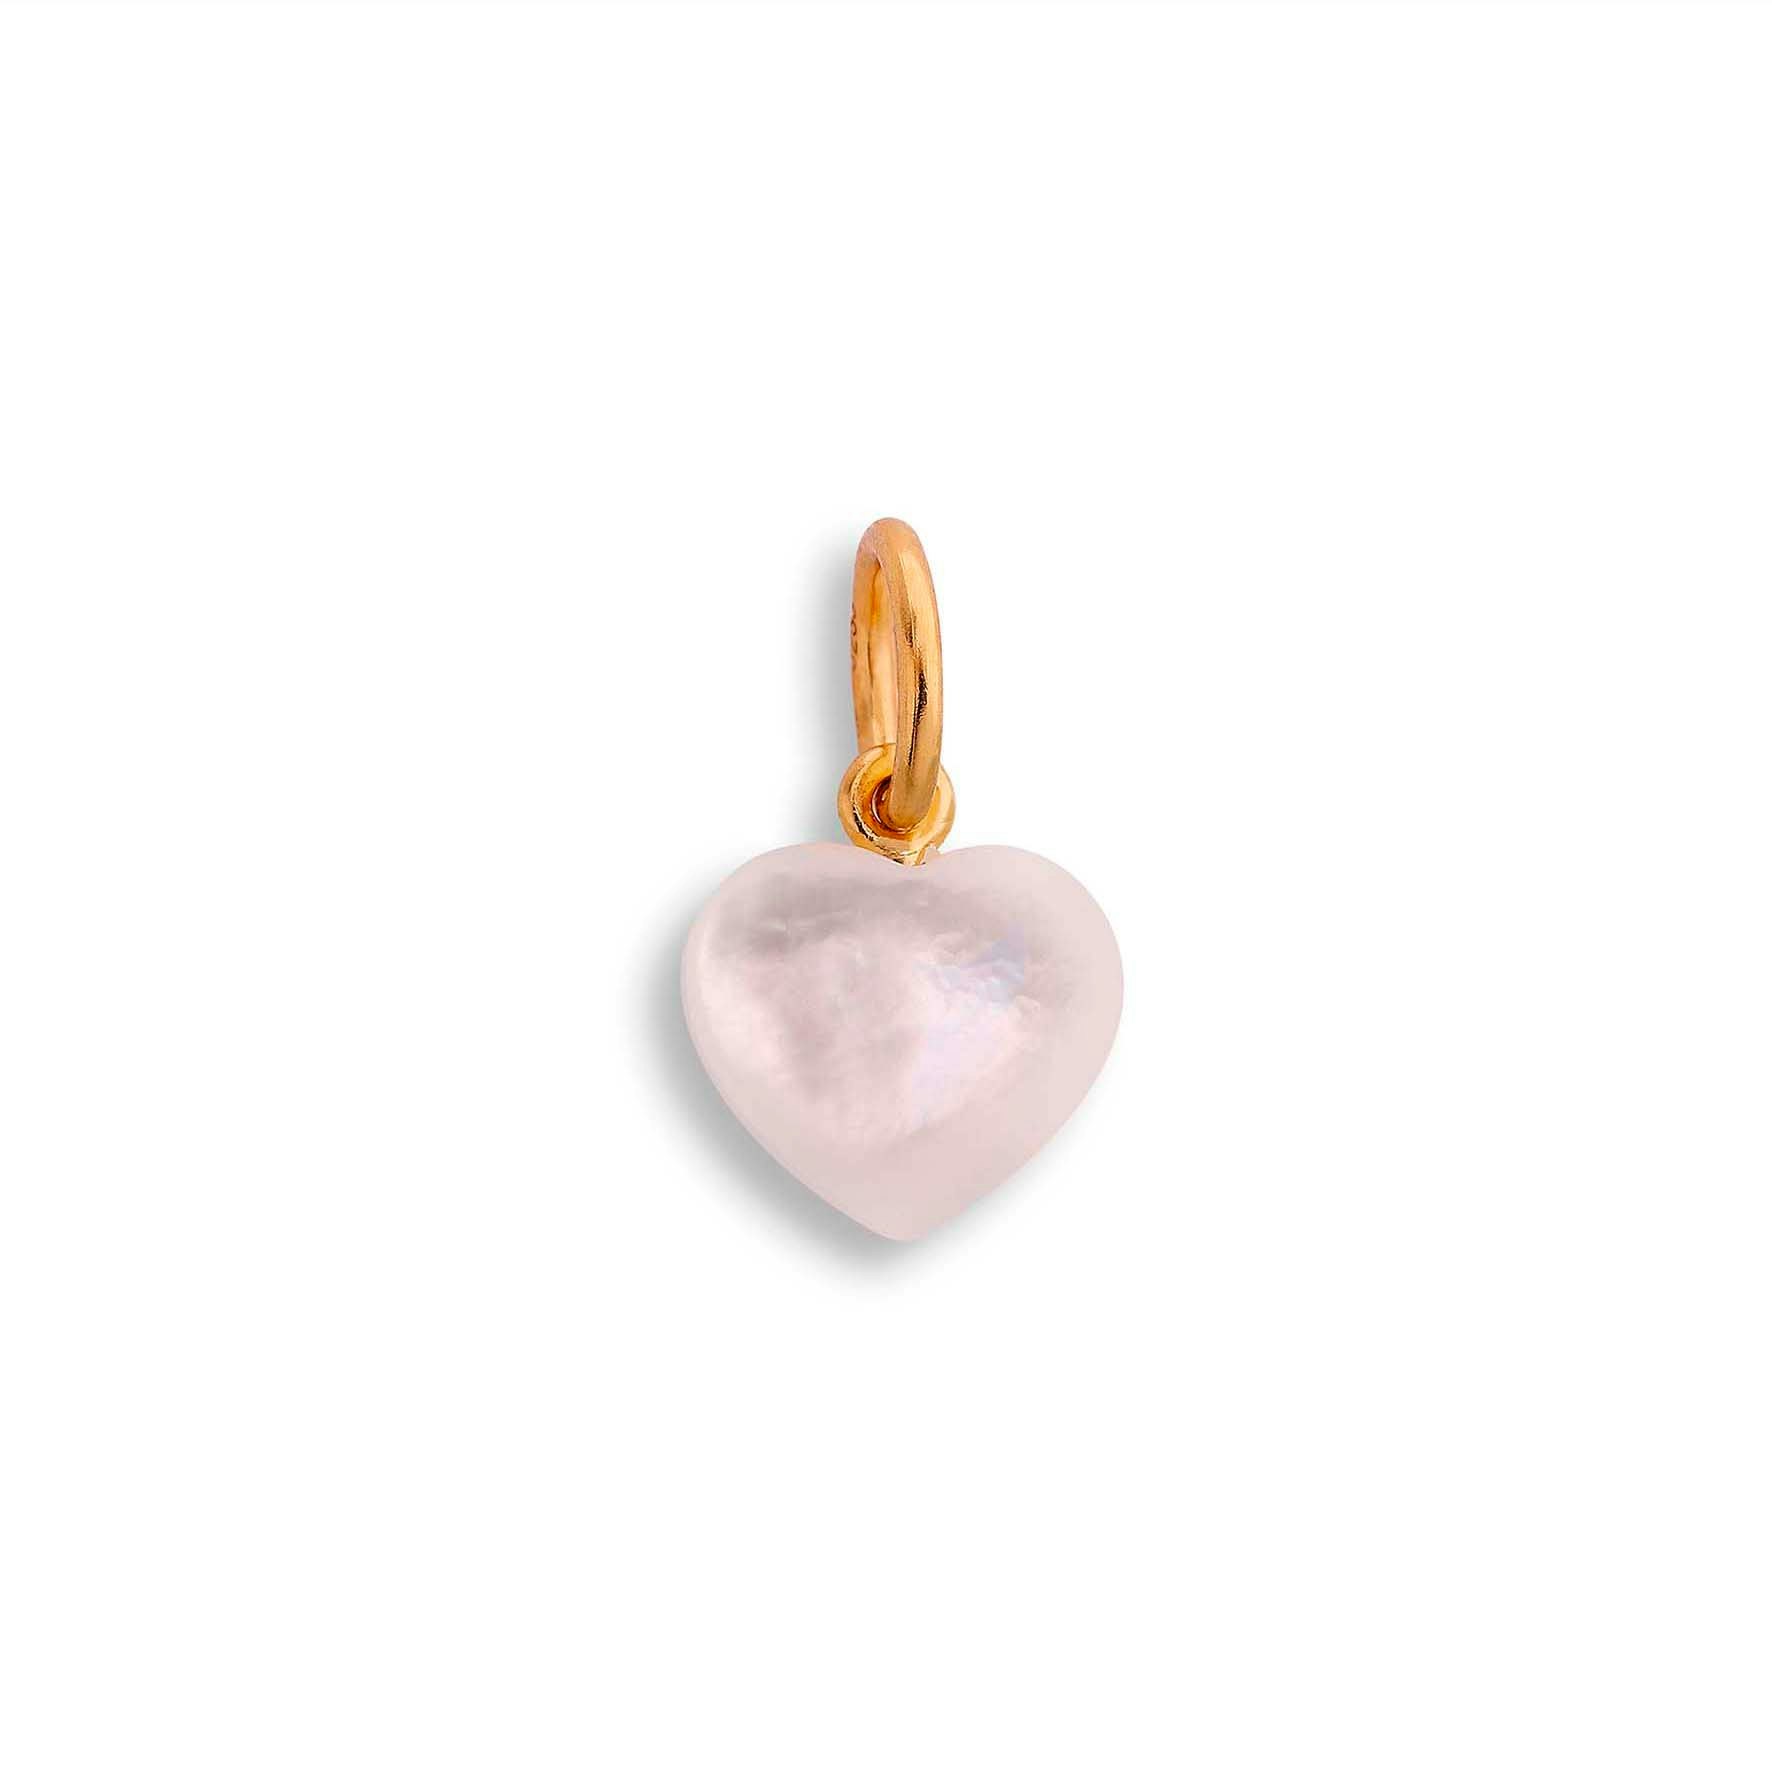 Small Souvenir Heart from Jane Kønig in Goldplated Silver Sterling 925